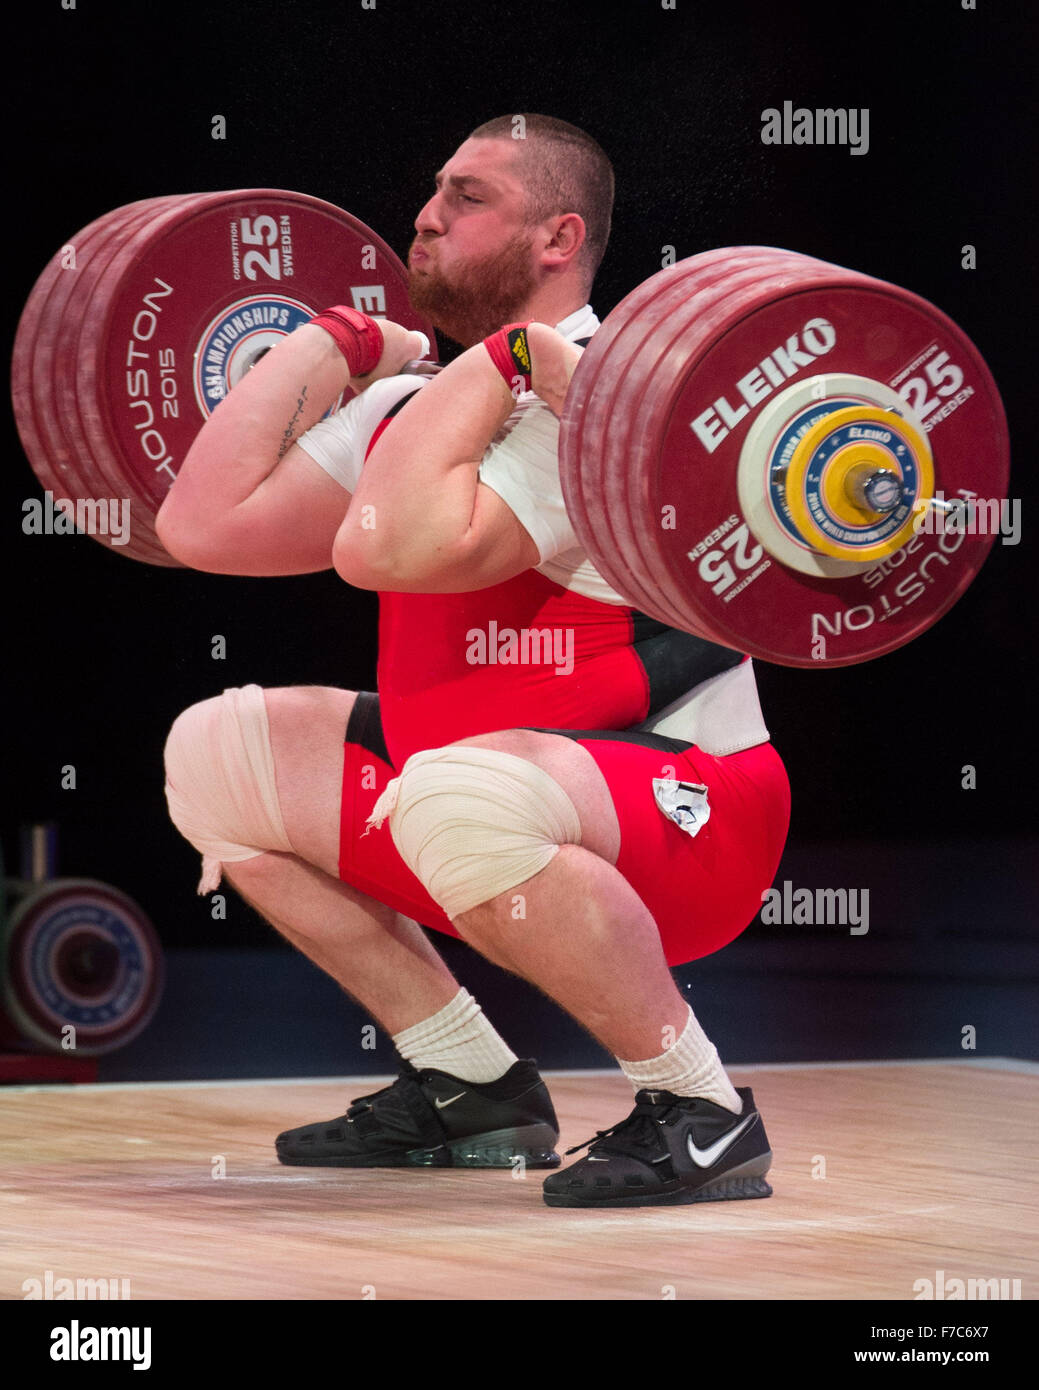 November 26, 2015: Lasha Talakhadze of Georgia wins the bronze medal in the  clean and jerk and a silver in the total in the Men's 105+ Class at the  World Weightlfting Championships